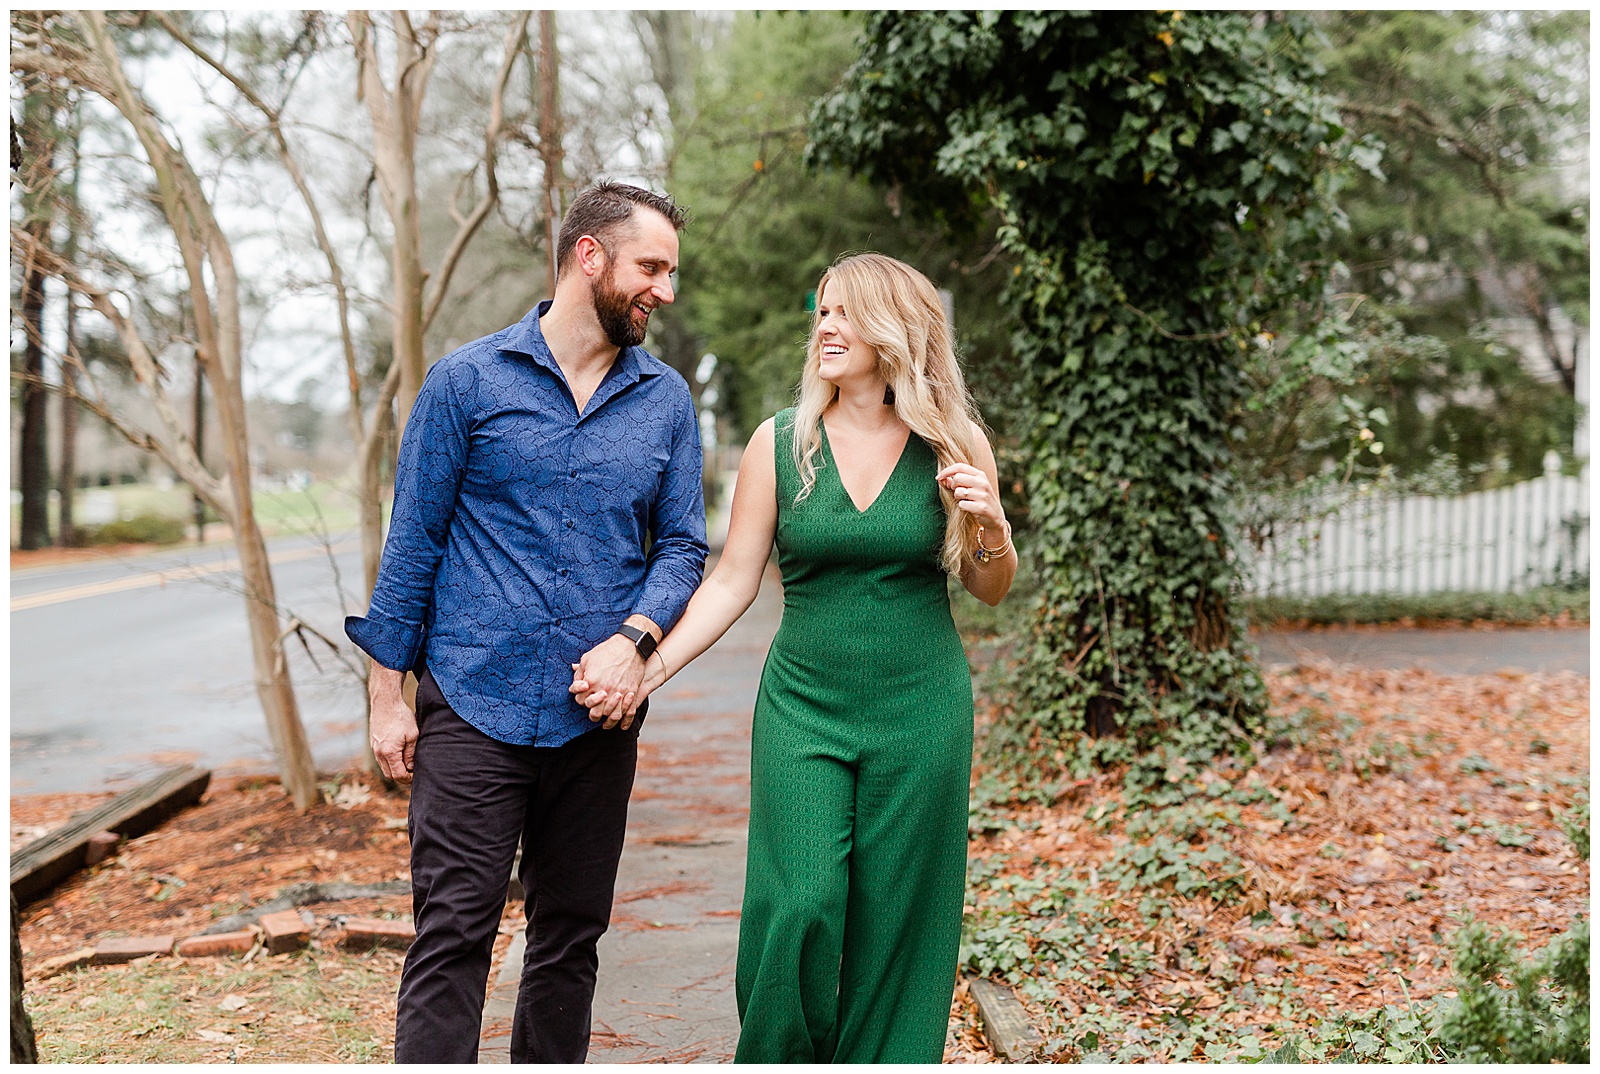 Adorable couple walking through park in downtown Waxhaw, NC Engagement Session with Green Dress Outfit Ideas